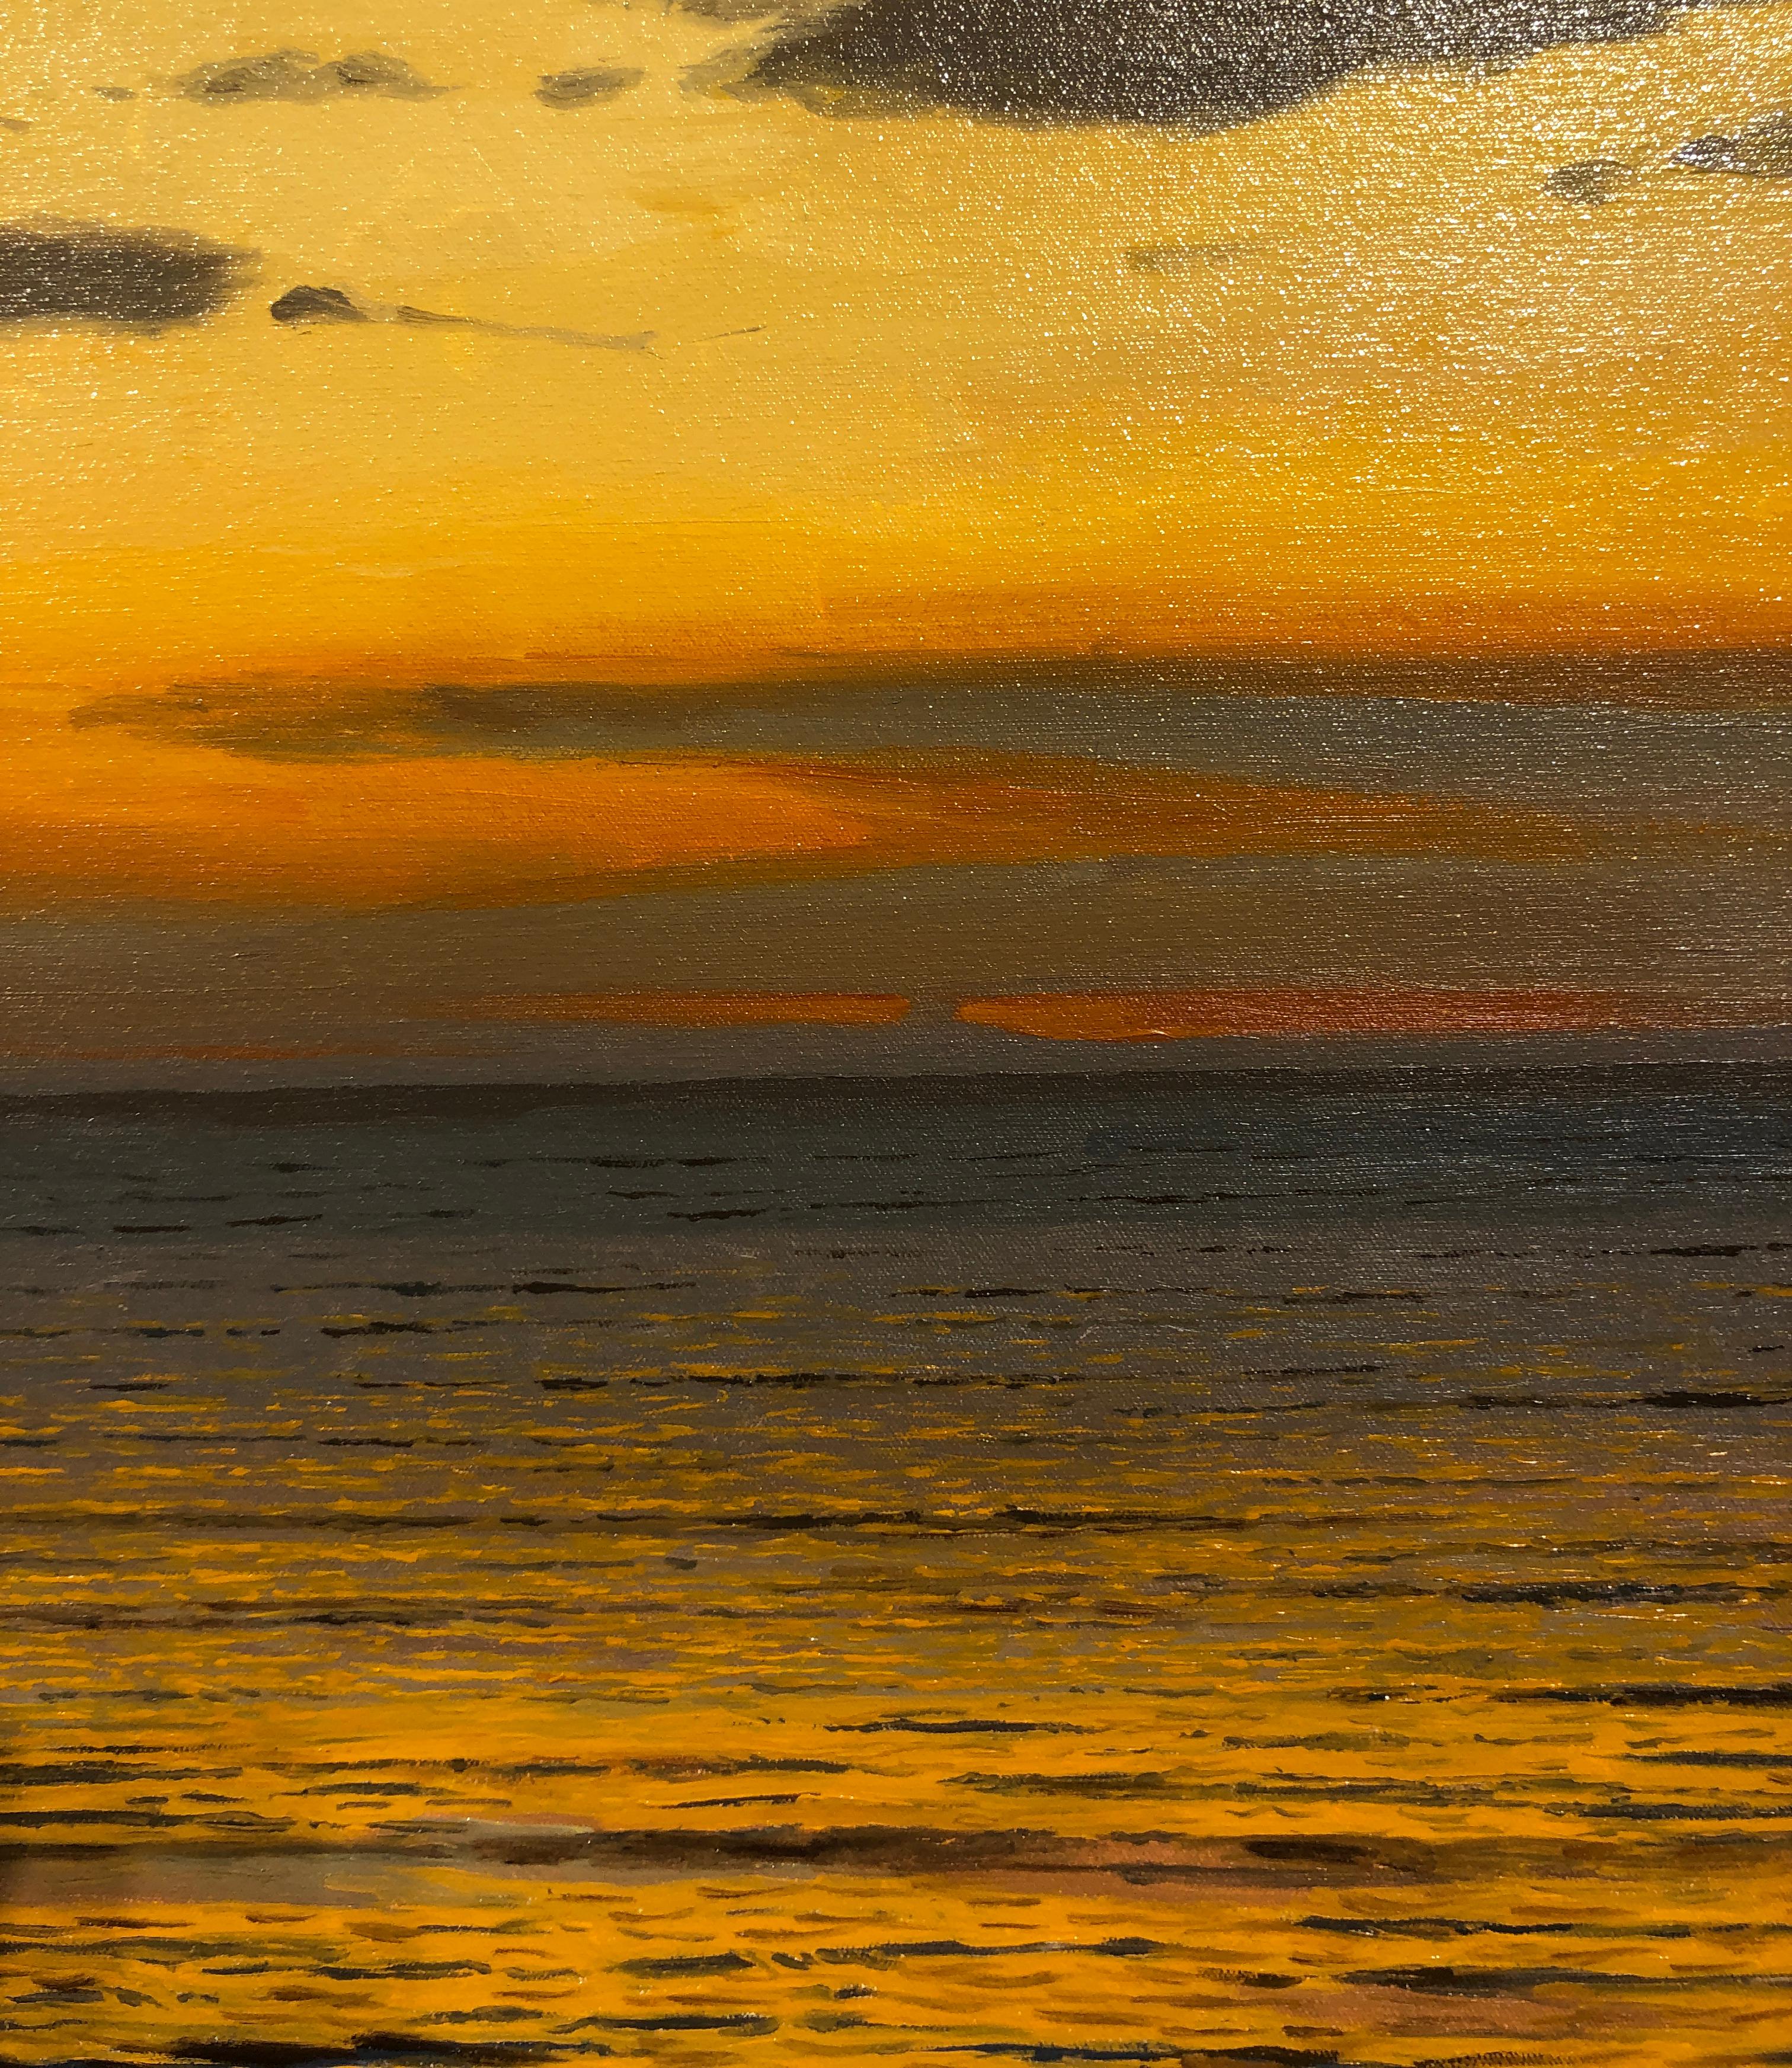 Oceans XIV - Original Oil Painting of Golden Sunset Reflected on Water 1